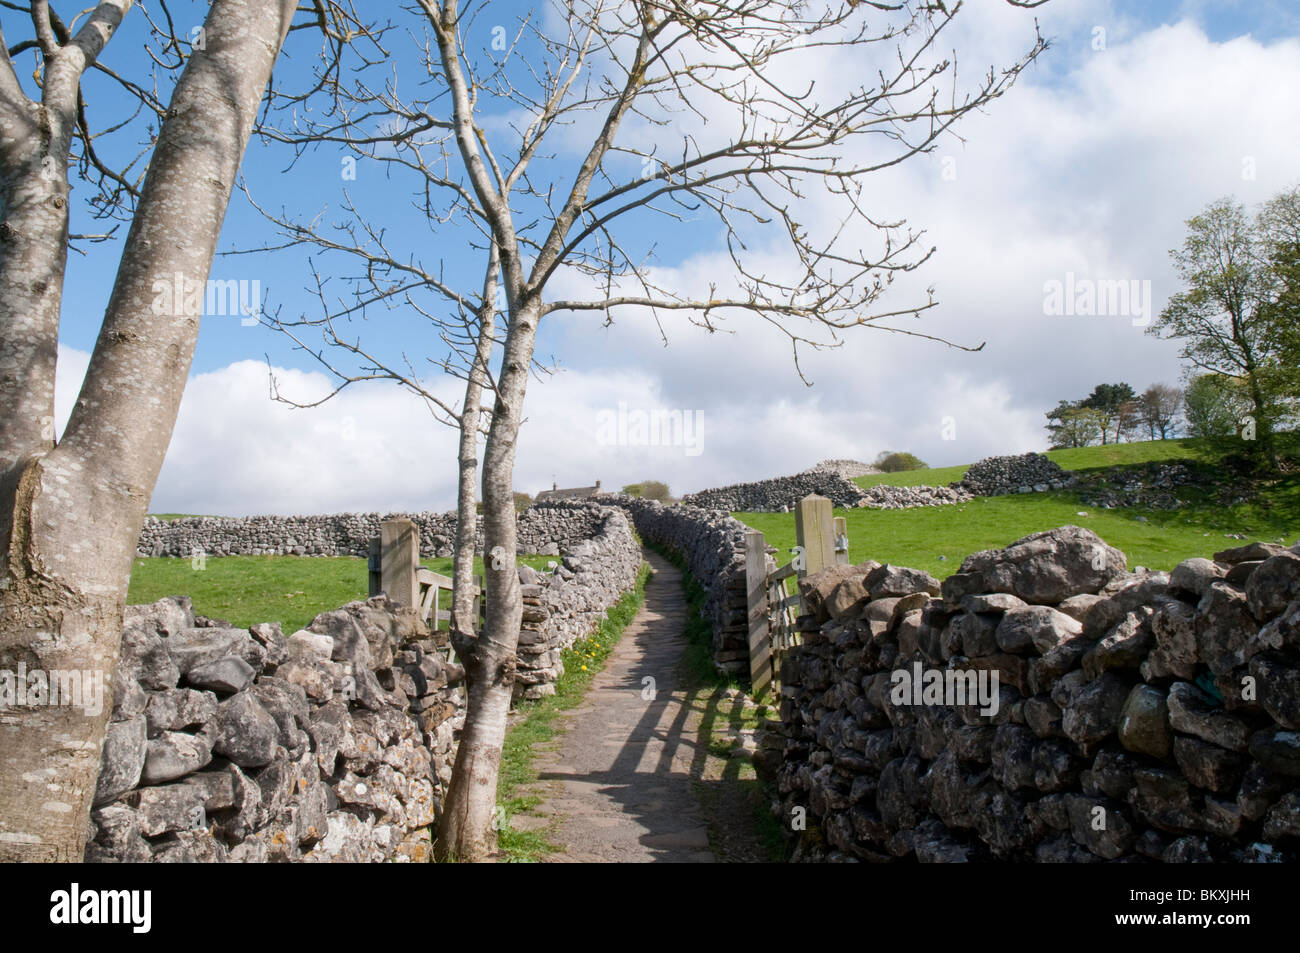 The village of Grassington in the Yorkshire Dales and Linton Falls Stock Photo